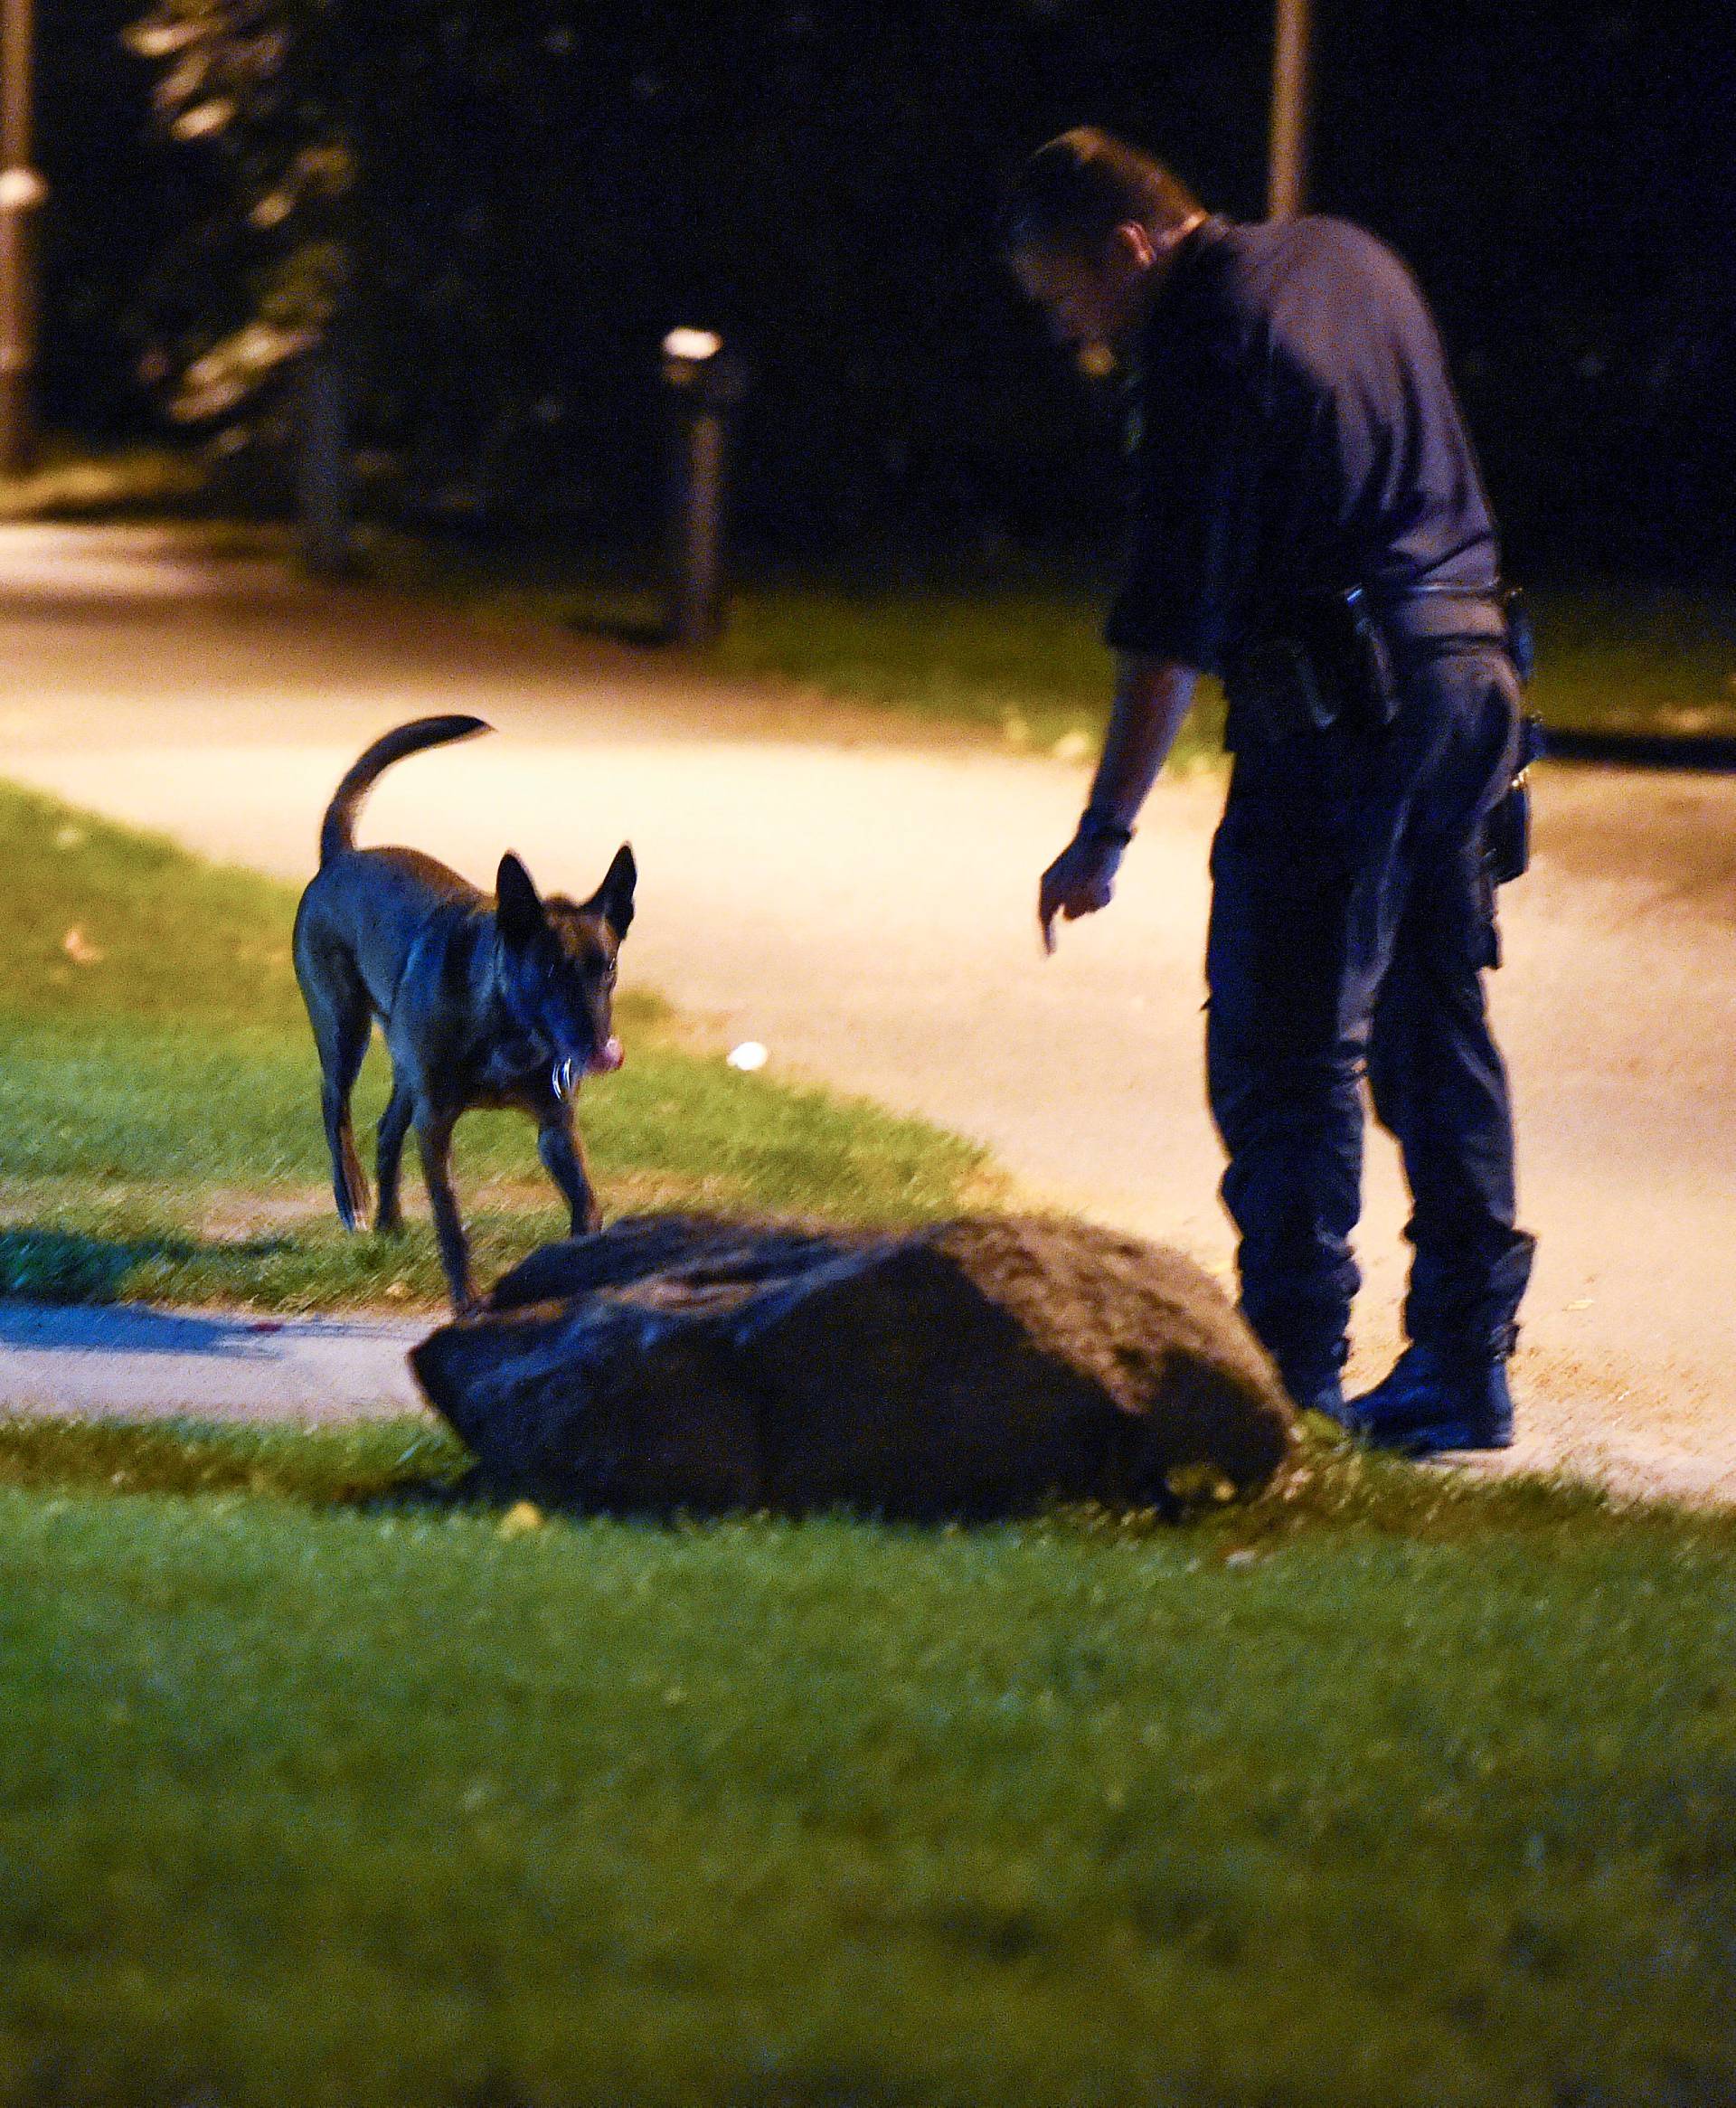 Police investigating the area after a shooting in southern Malmo